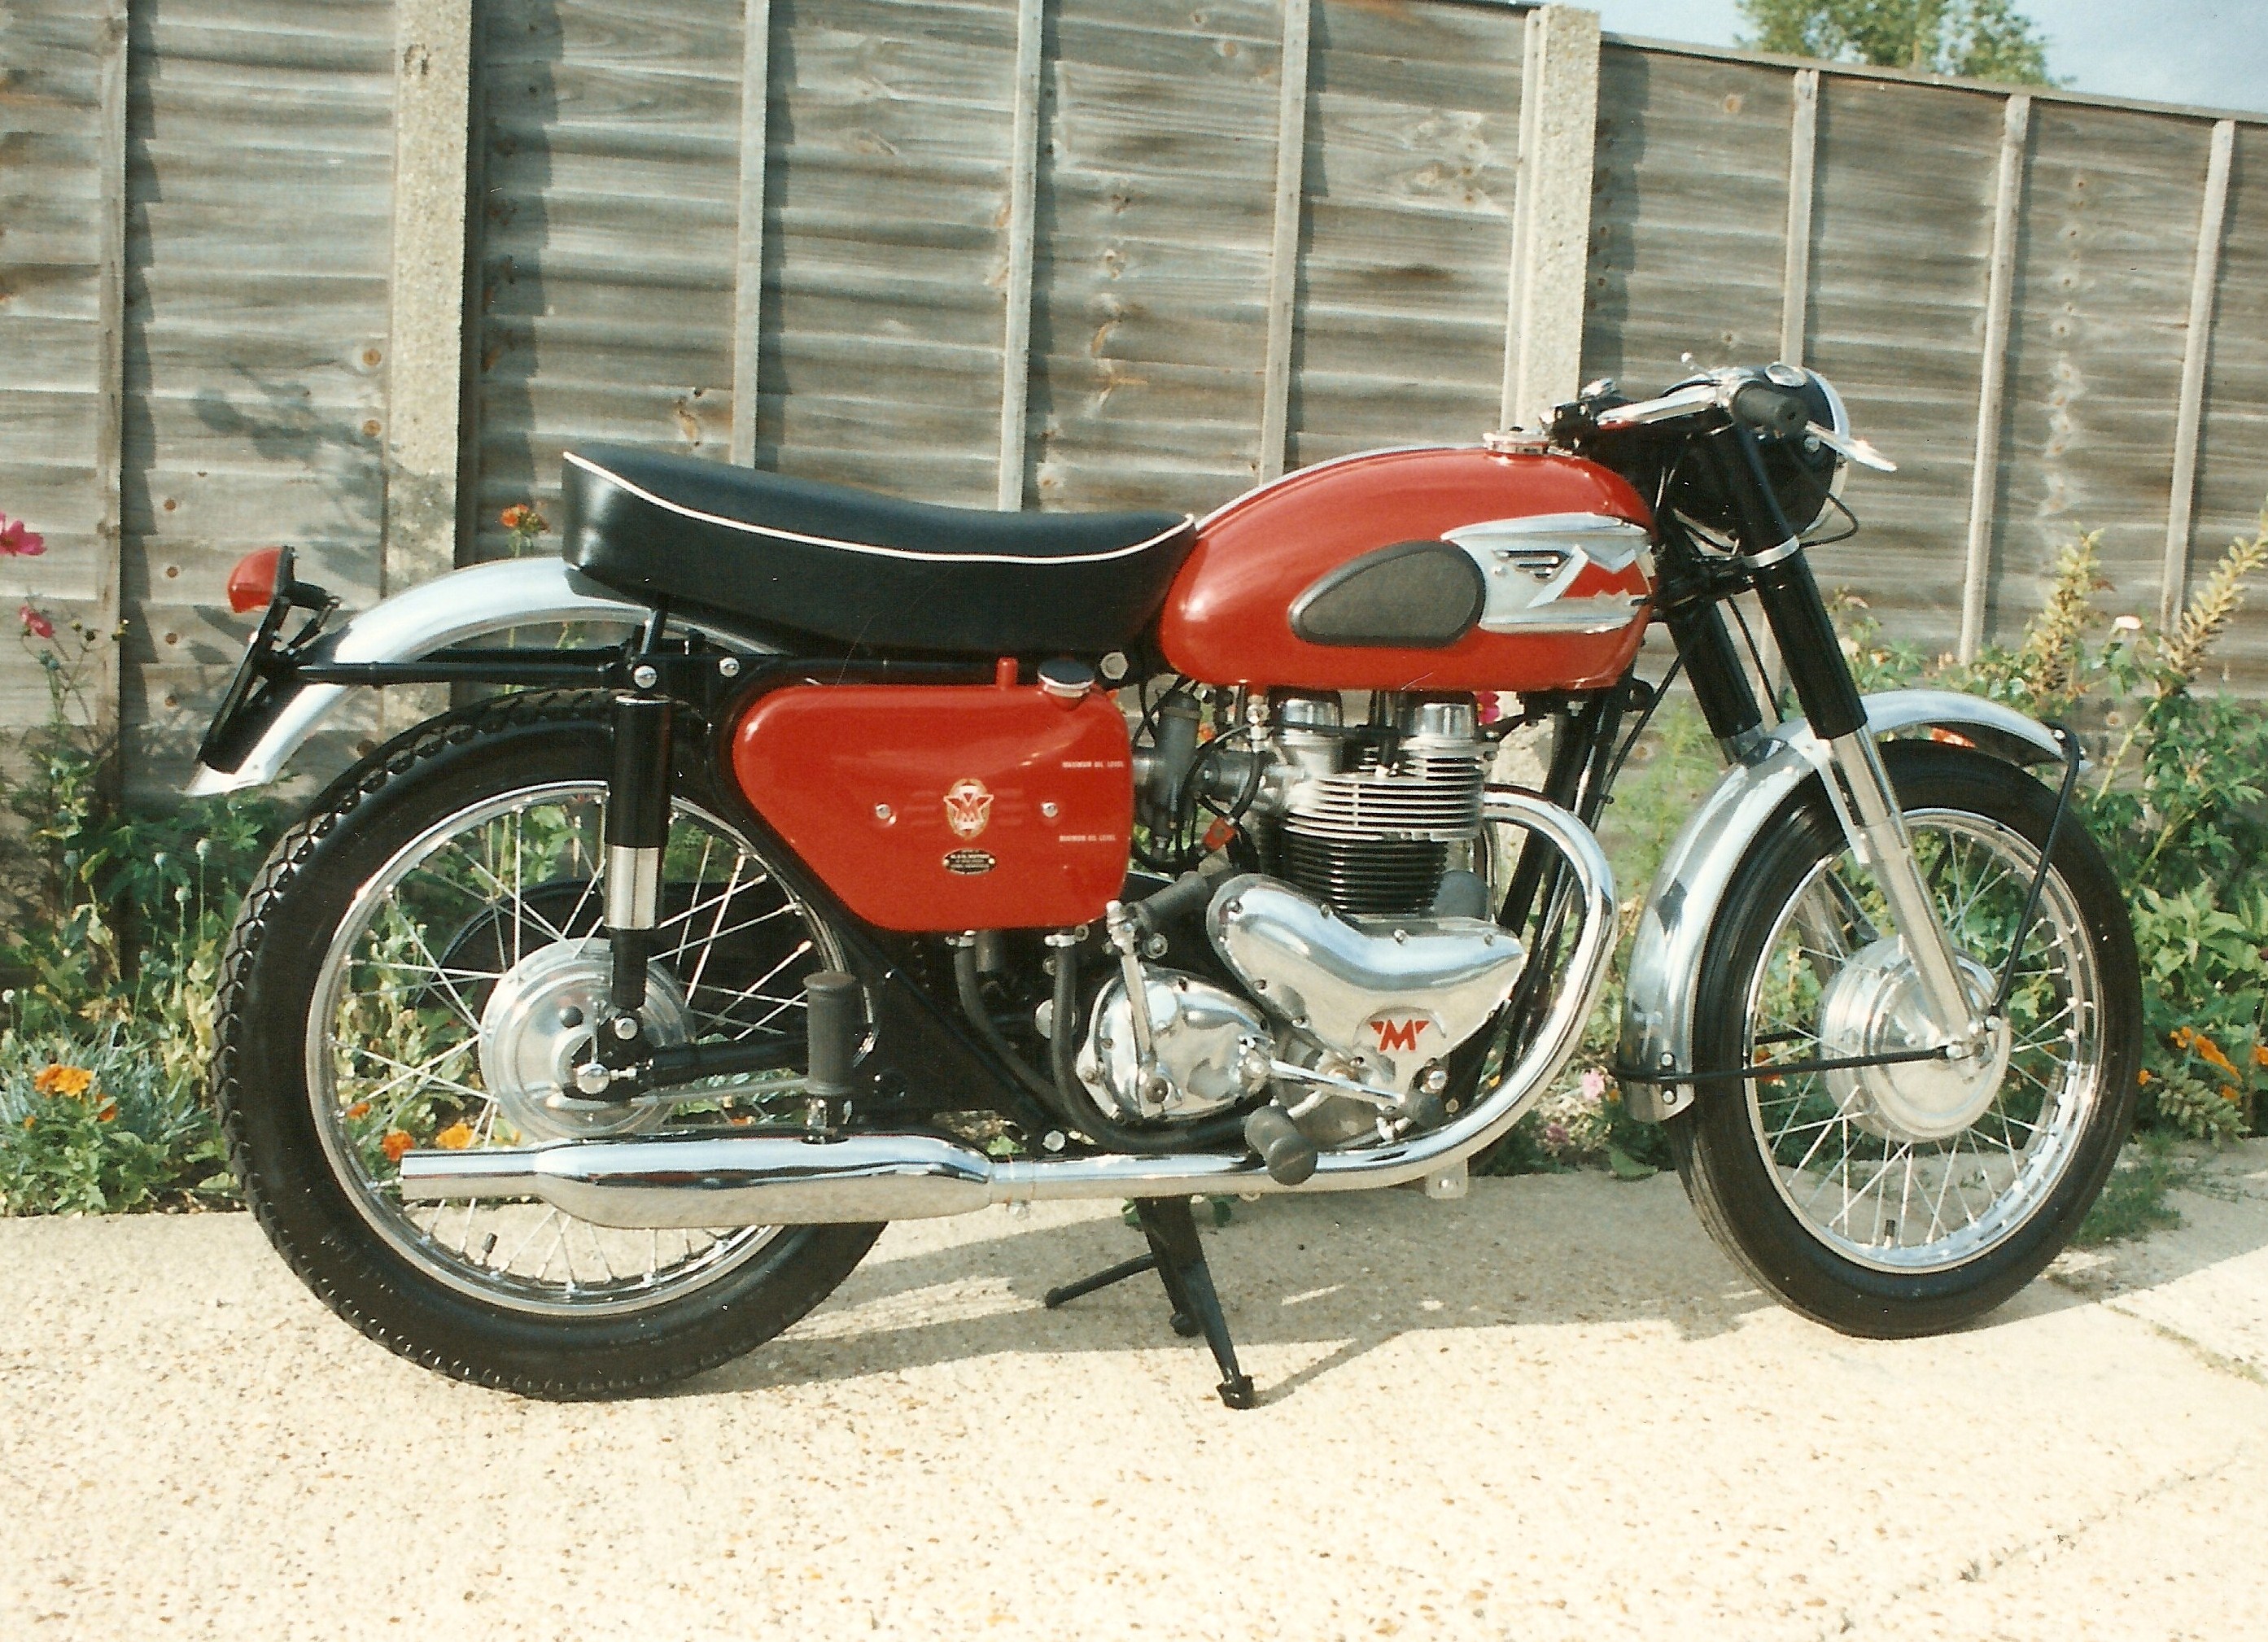 To this sporty Matchless G12 which was an unusual project in so far as it was one of the few restorables that was completely unmolested and still in original factory finish